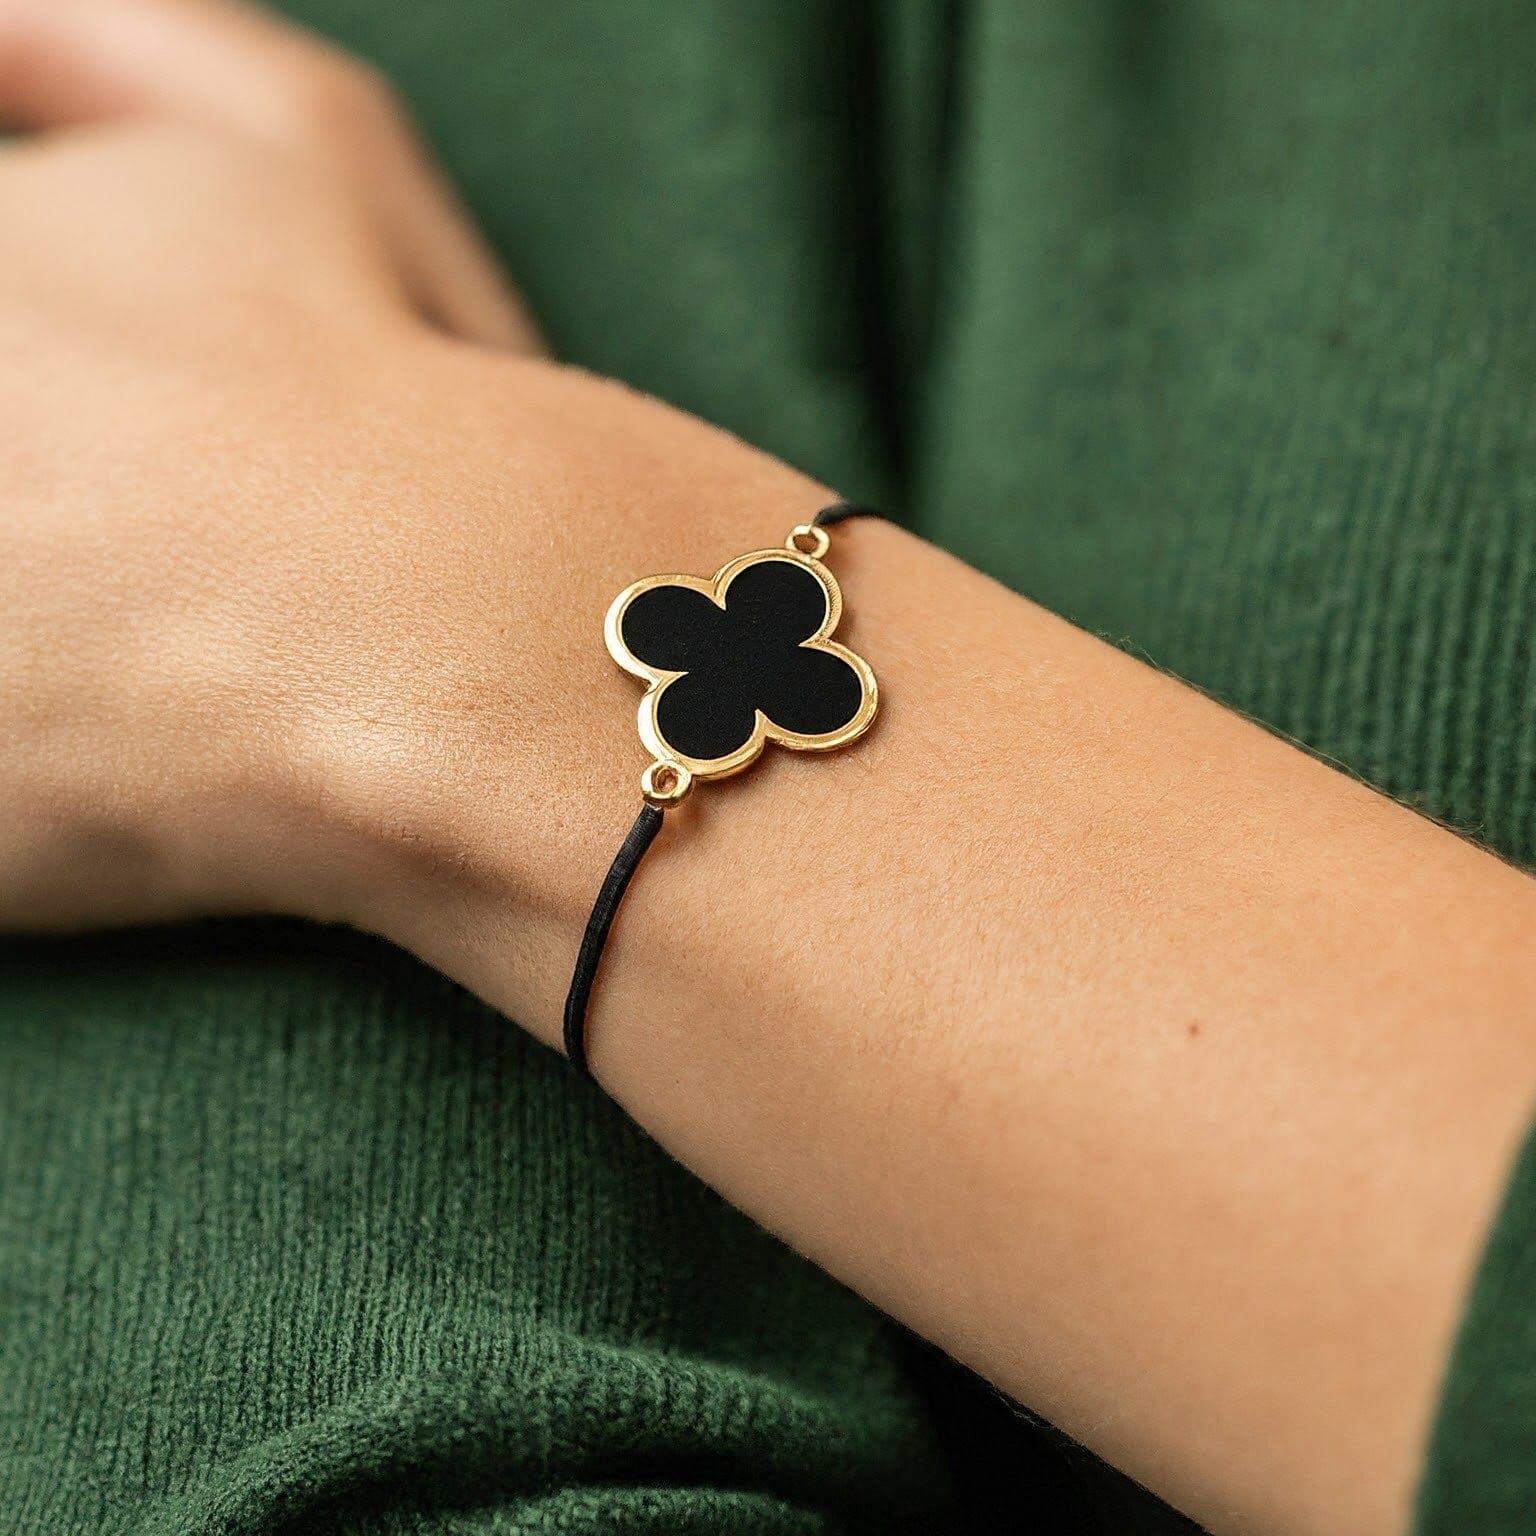 Clover Bracelet Black and Gold: A Guide to Luck and Style